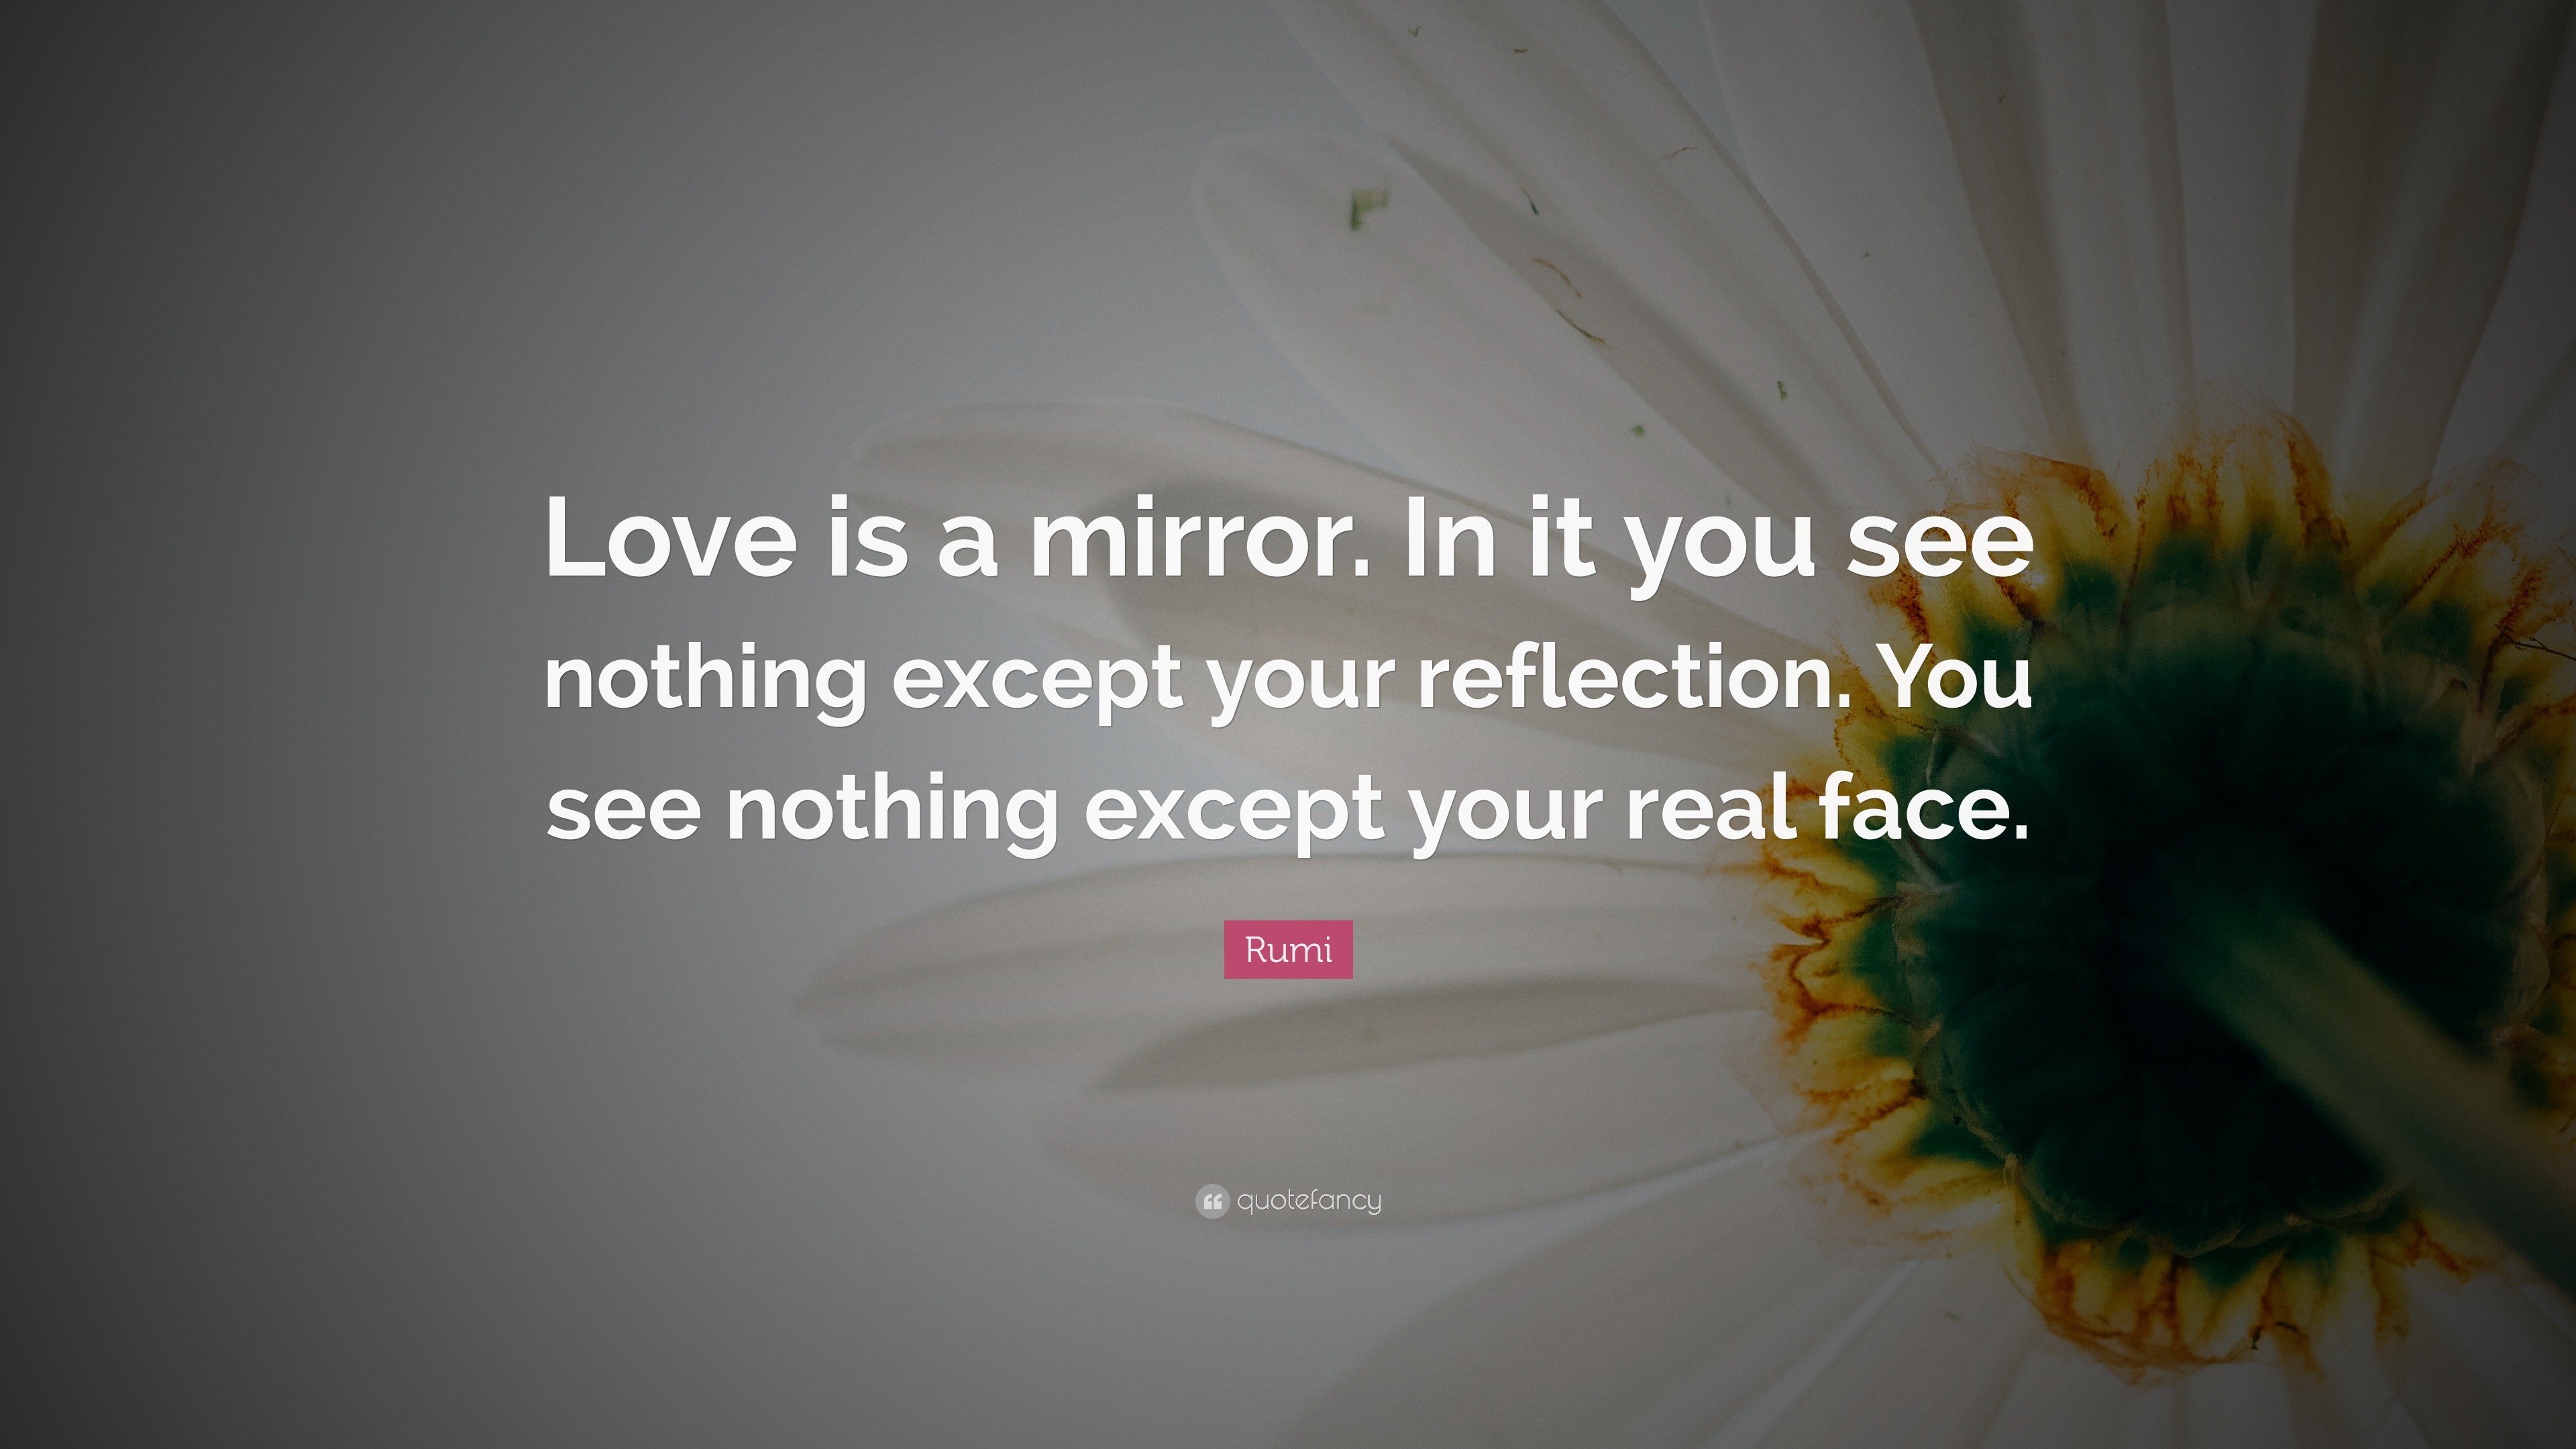 Rumi Quote “Love is a mirror. In it you see nothing